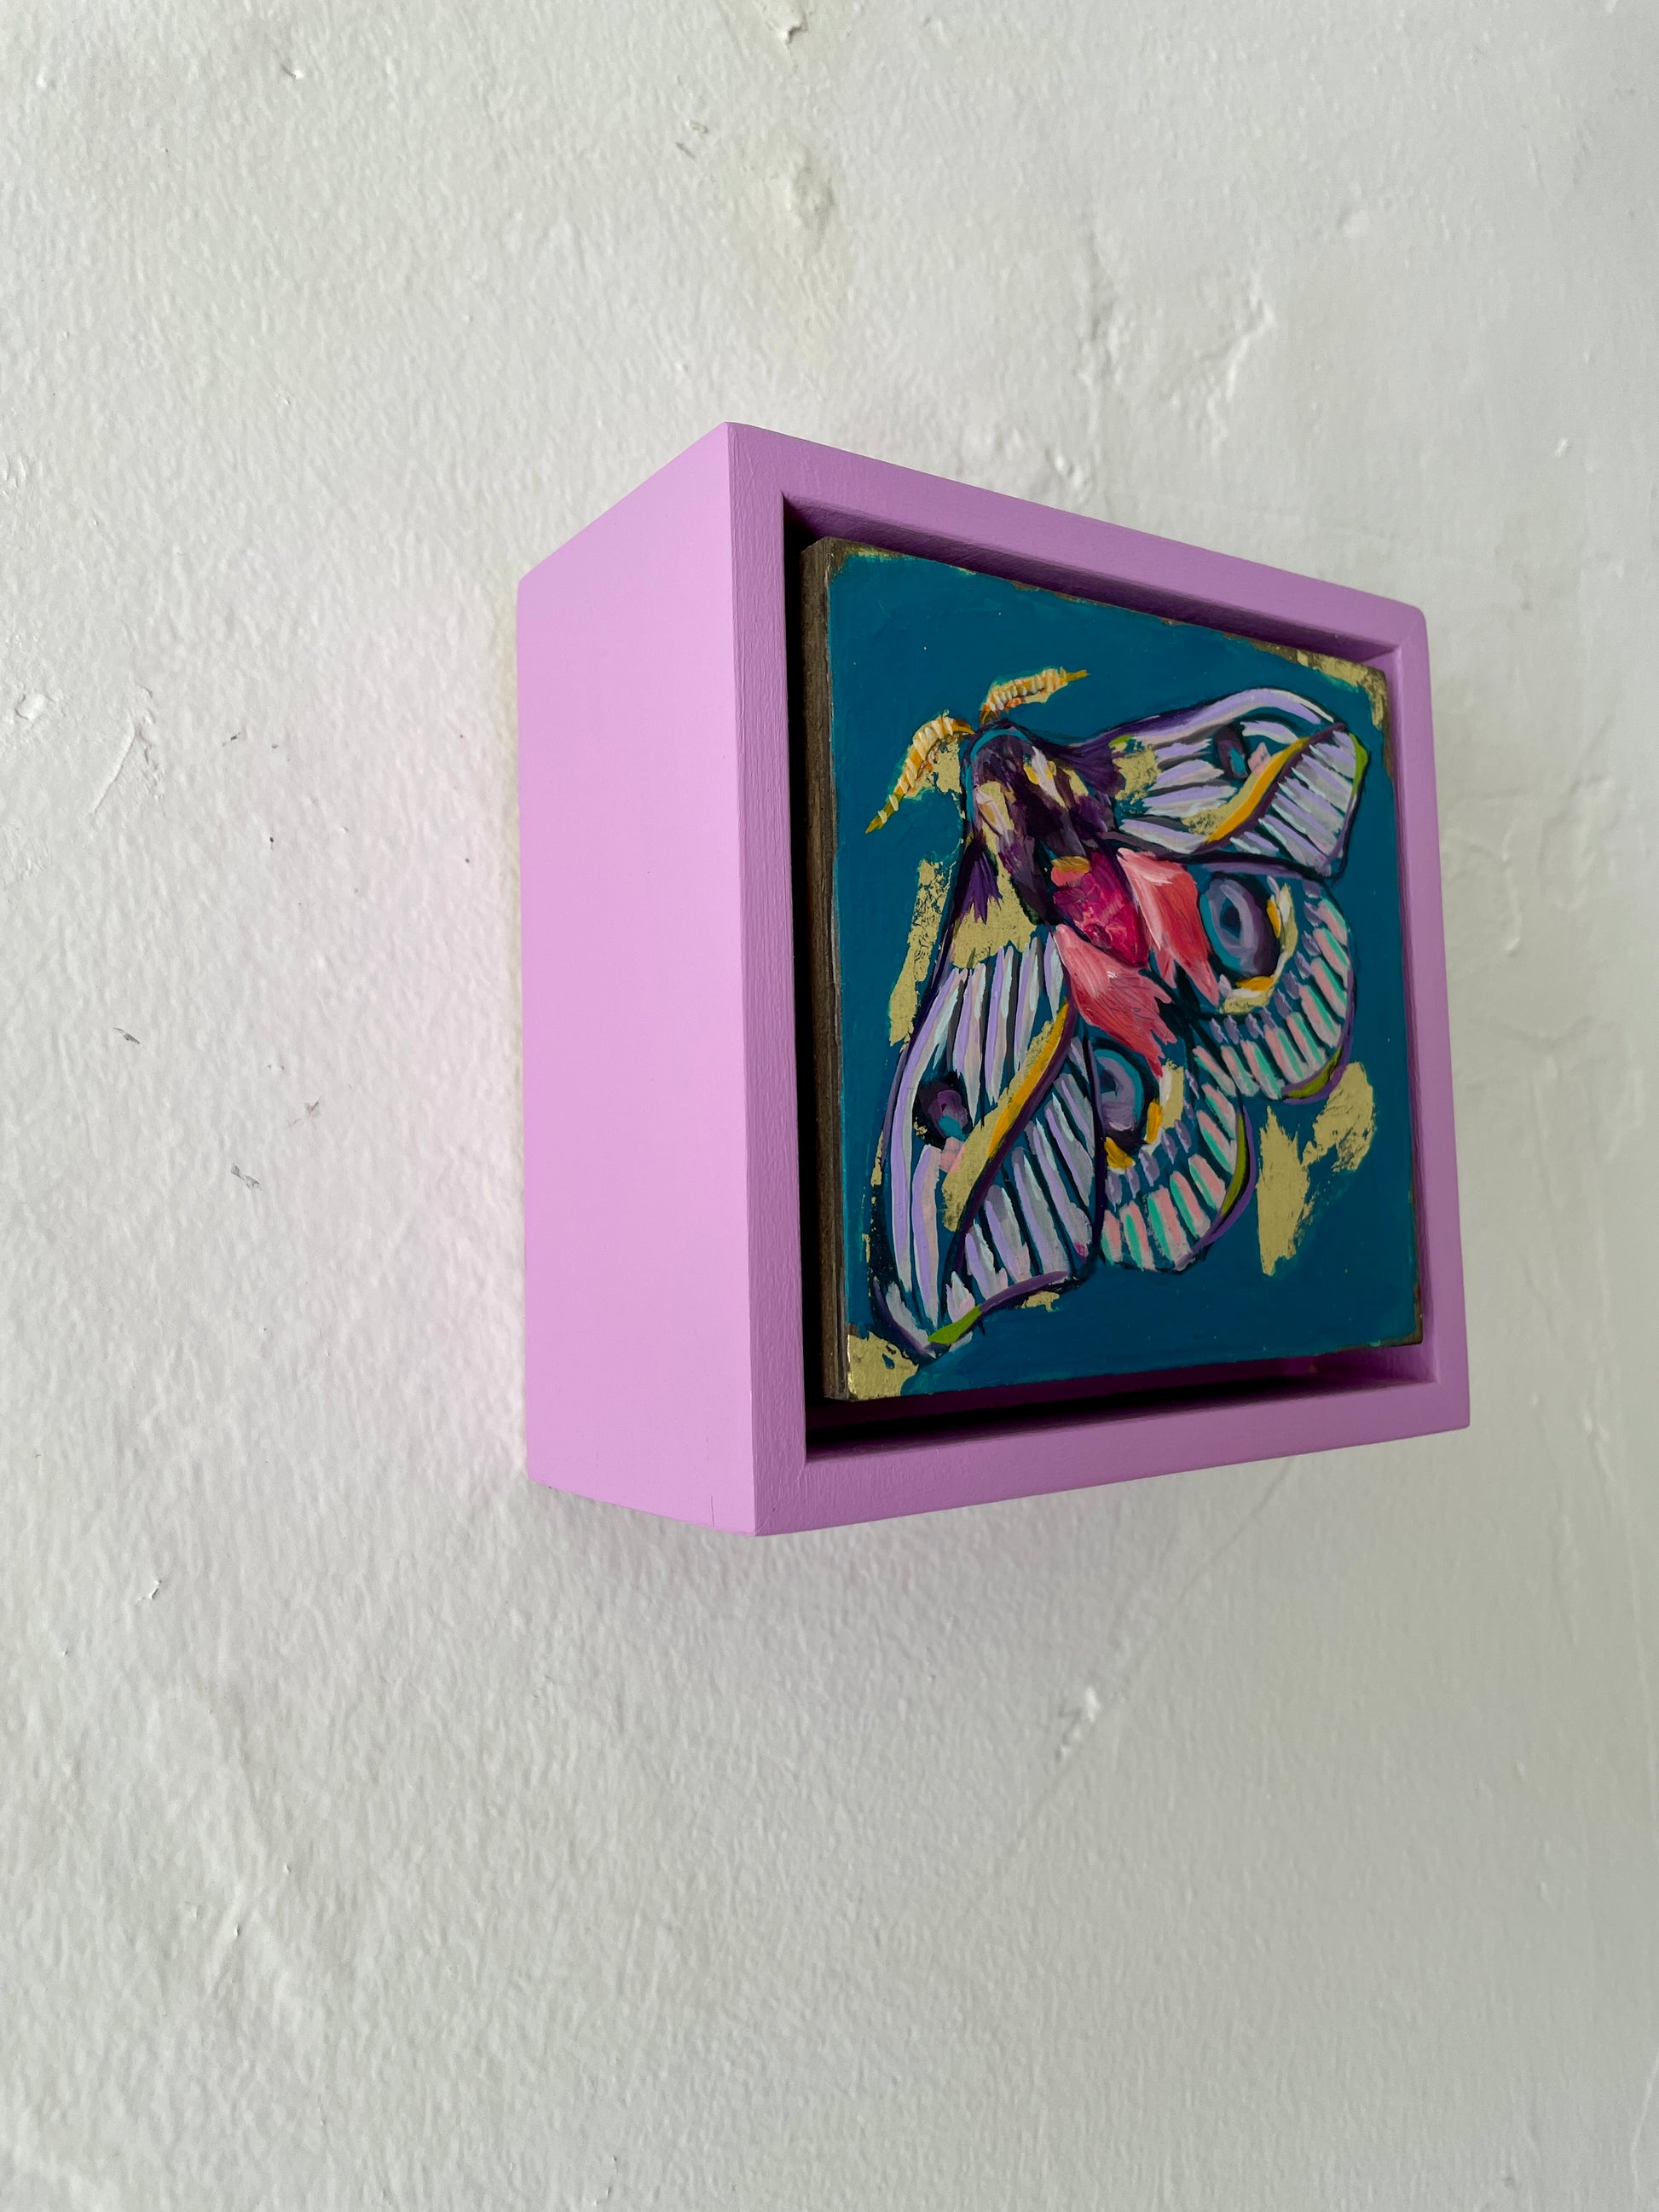 Colorful whimsical painting of a moth in blues, purples, pinks with touch of gold leaf; 5"x5" incl painted frame; artist Shaney Watters; side view shown hanging on wall